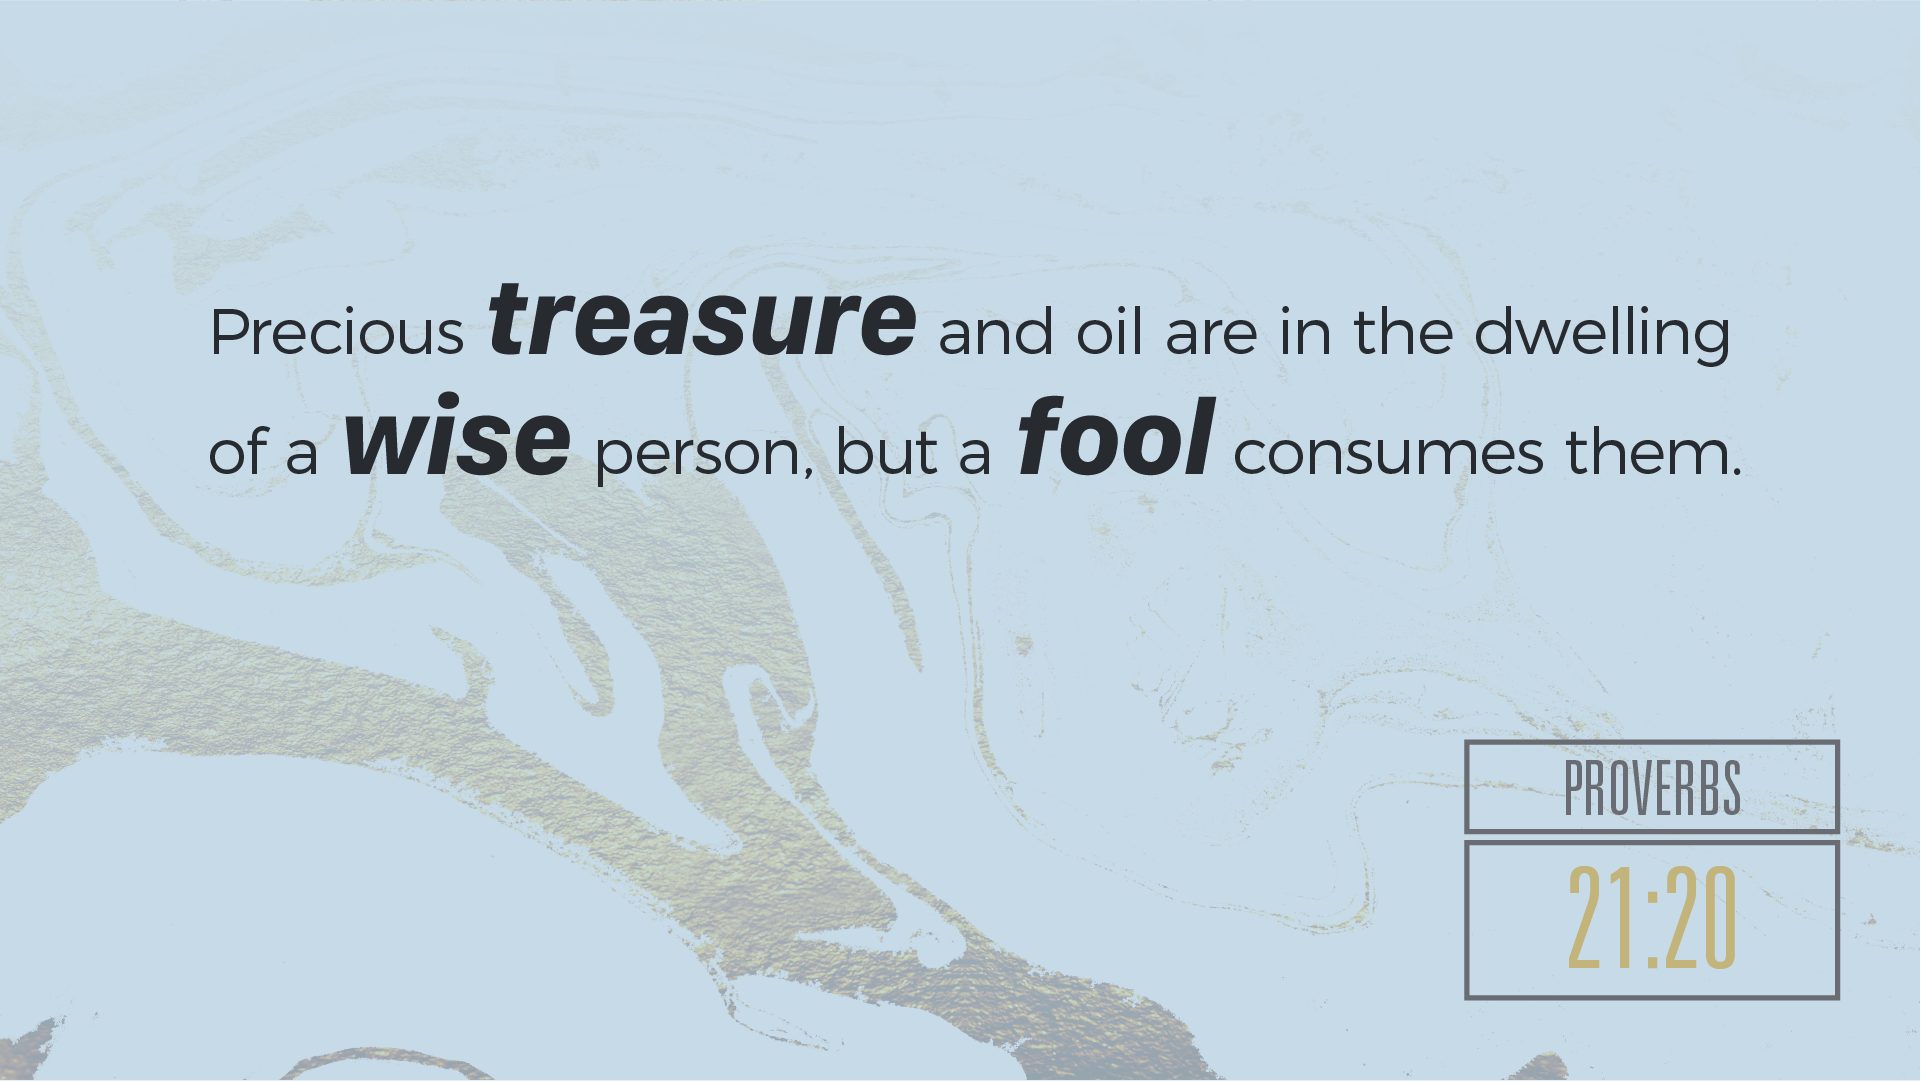 Proverbs on Wealth - Prov. 21:20